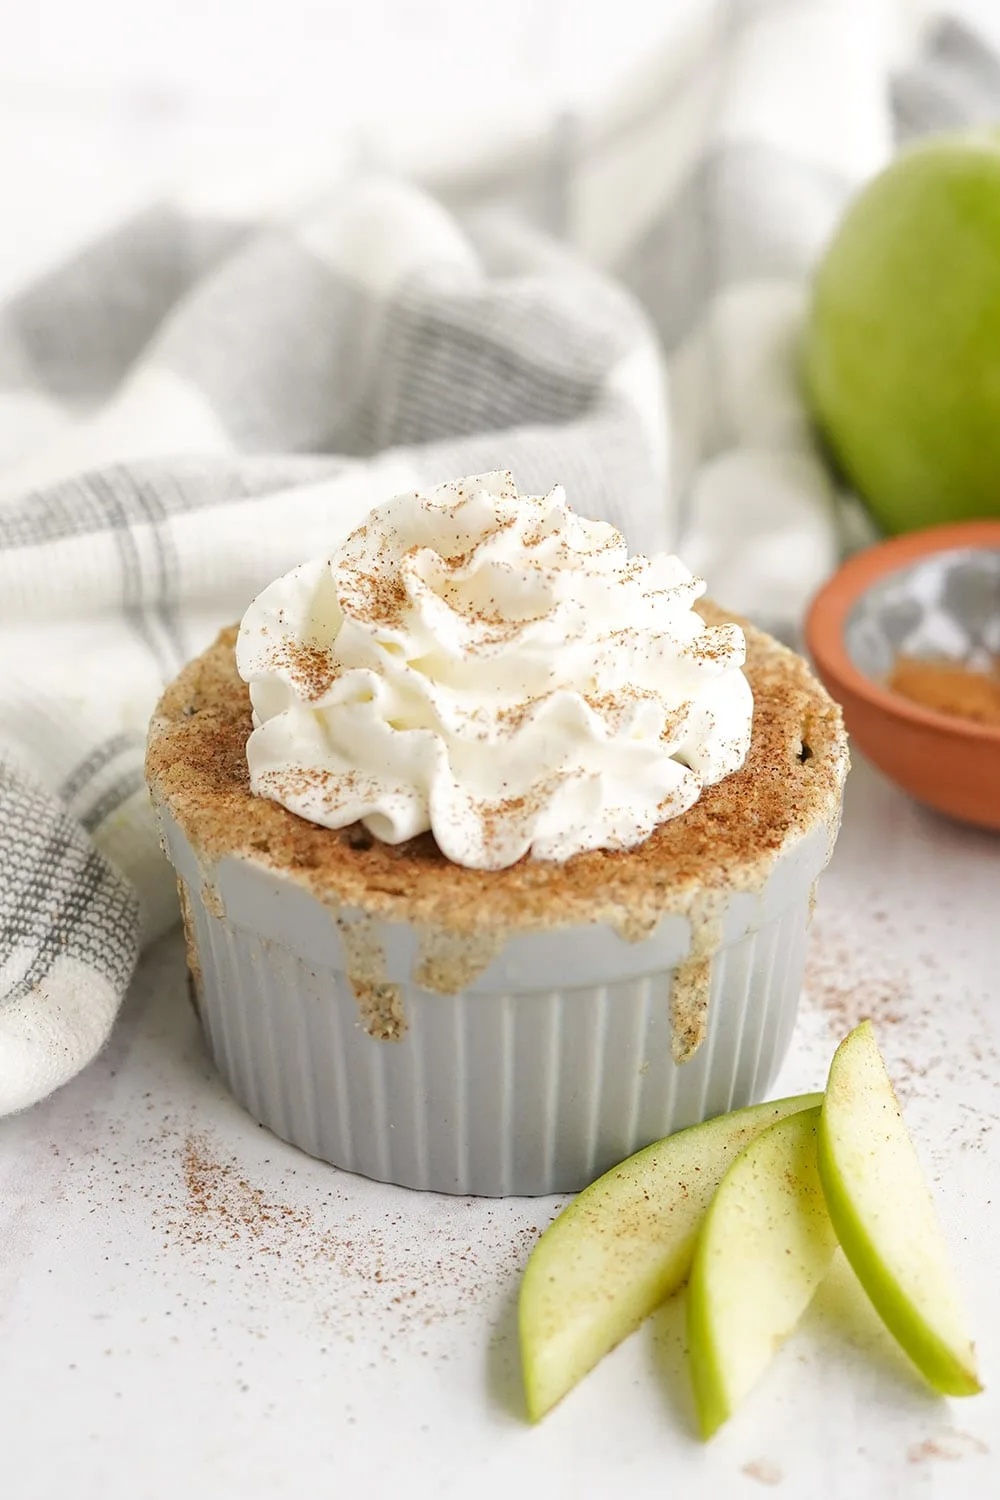 Cake topped with cinnamon and whipped cream in a gray dish with apple slices on the table.